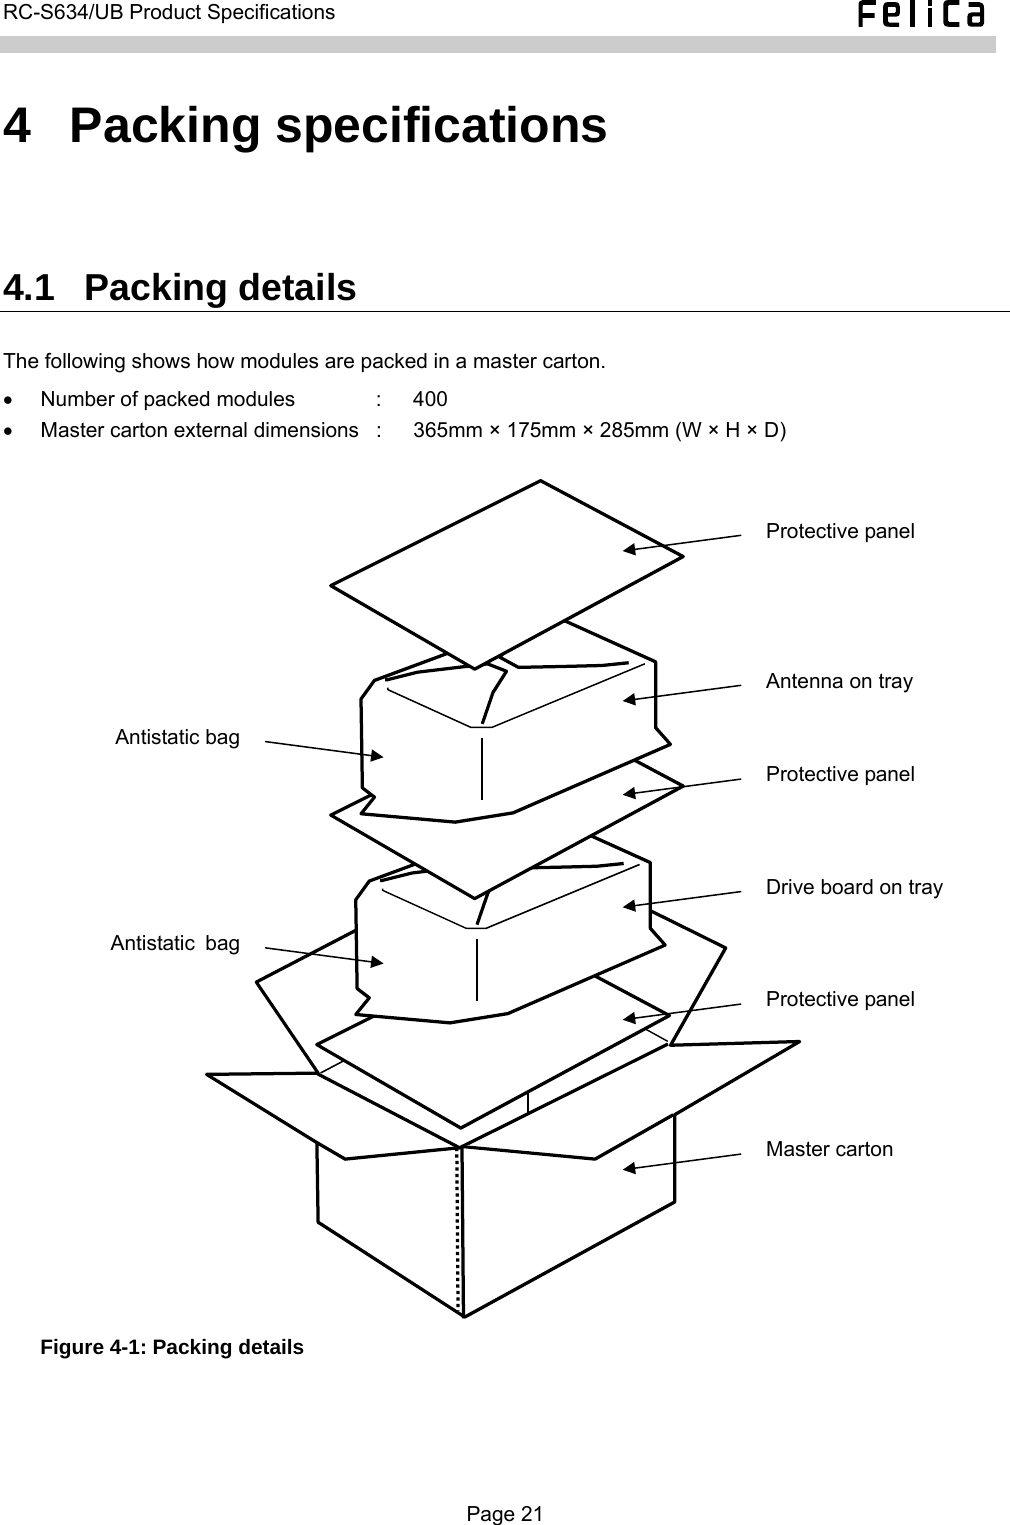   RC-S634/UB Product Specifications  4  Packing specifications 4.1  Packing details The following shows how modules are packed in a master carton. •  Number of packed modules     :  400 •  Master carton external dimensions  :  365mm × 175mm × 285mm (W × H × D)  Drive board on trayAntenna on tray Protective panel Antistatic bag Master carton Antistatic bag Protective panel Protective panel  Figure 4-1: Packing details  Page 21  